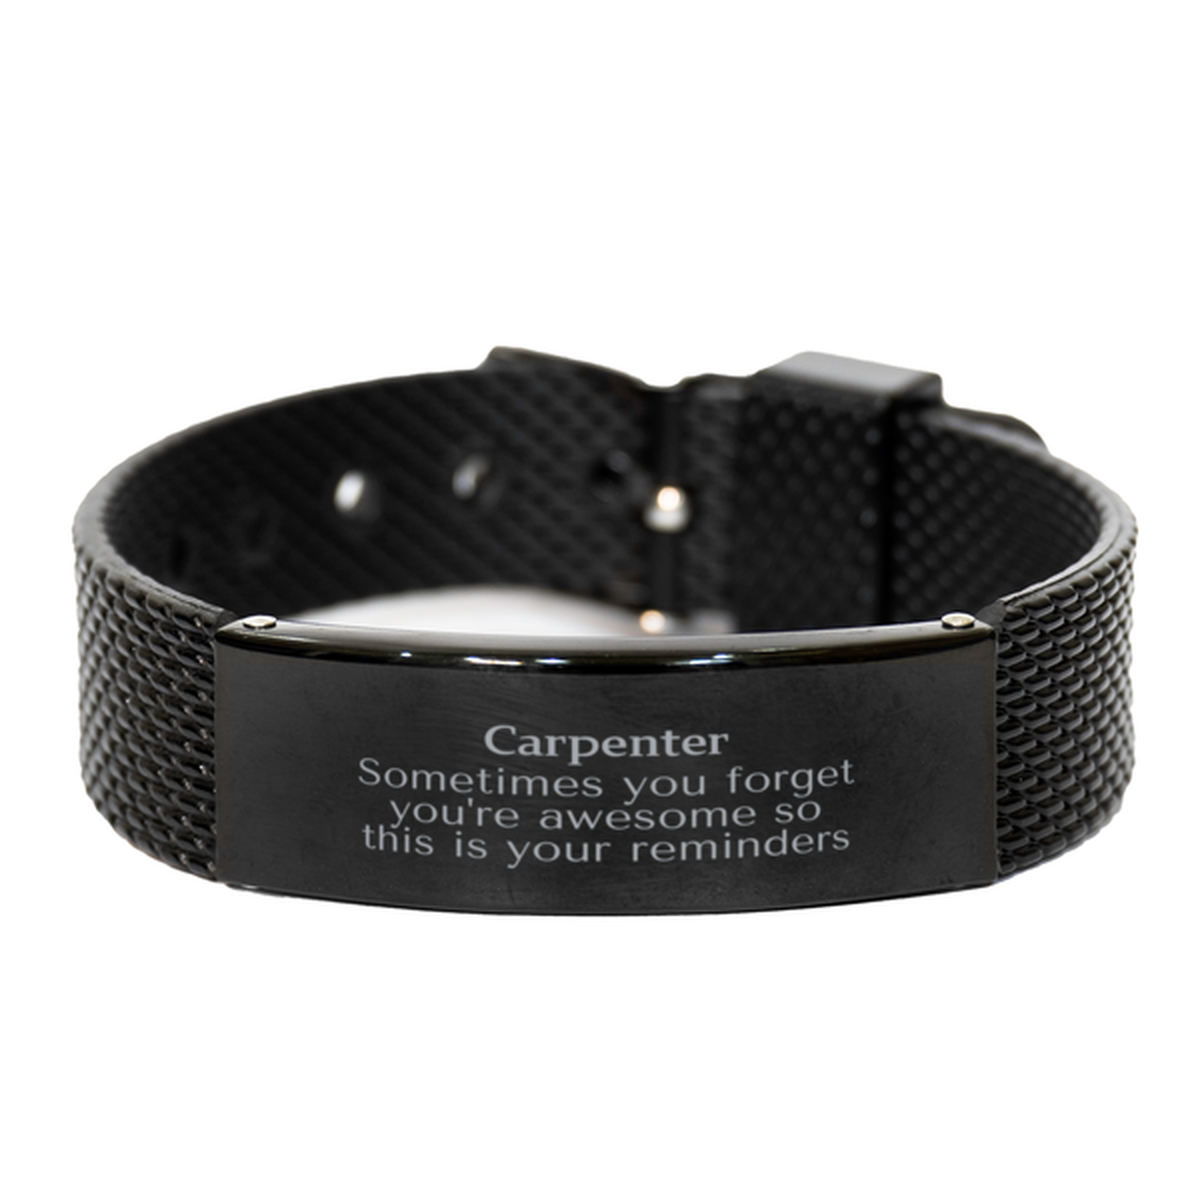 Sentimental Carpenter Black Shark Mesh Bracelet, Carpenter Sometimes you forget you're awesome so this is your reminders, Graduation Christmas Birthday Gifts for Carpenter, Men, Women, Coworkers